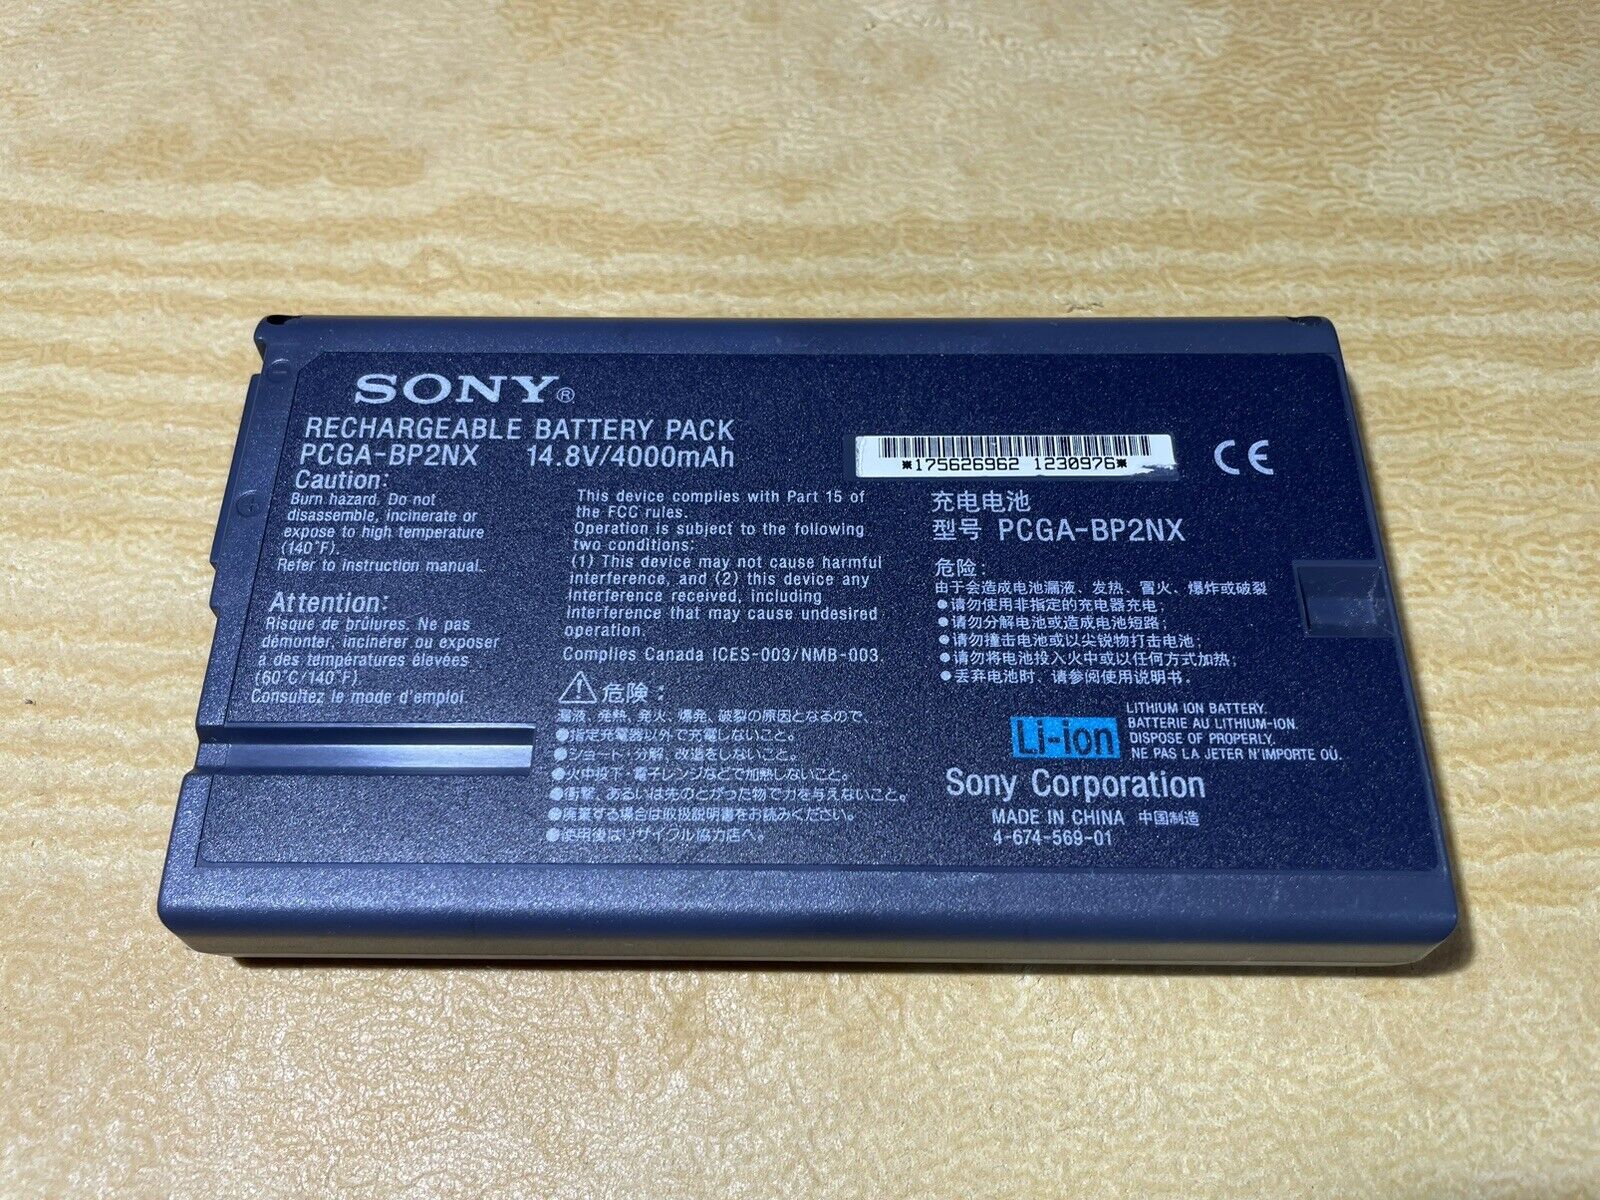 Sony VAIO PCGA-BP2NX LITHIUM-ION Battery Pack *UNTESTED*